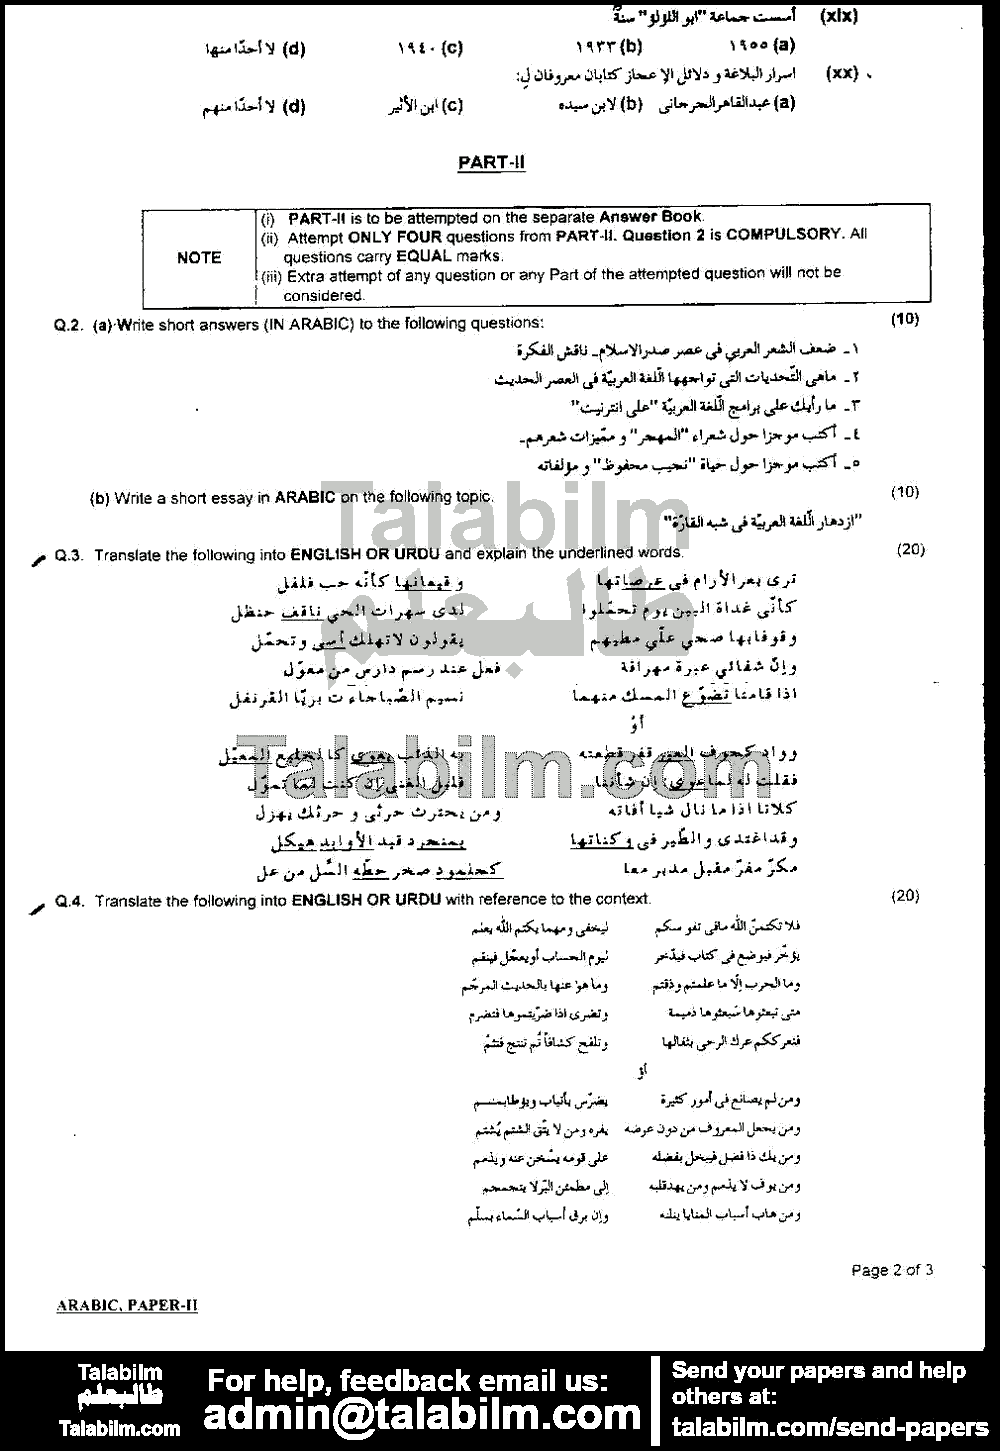 Arabic 0 past paper for 2010